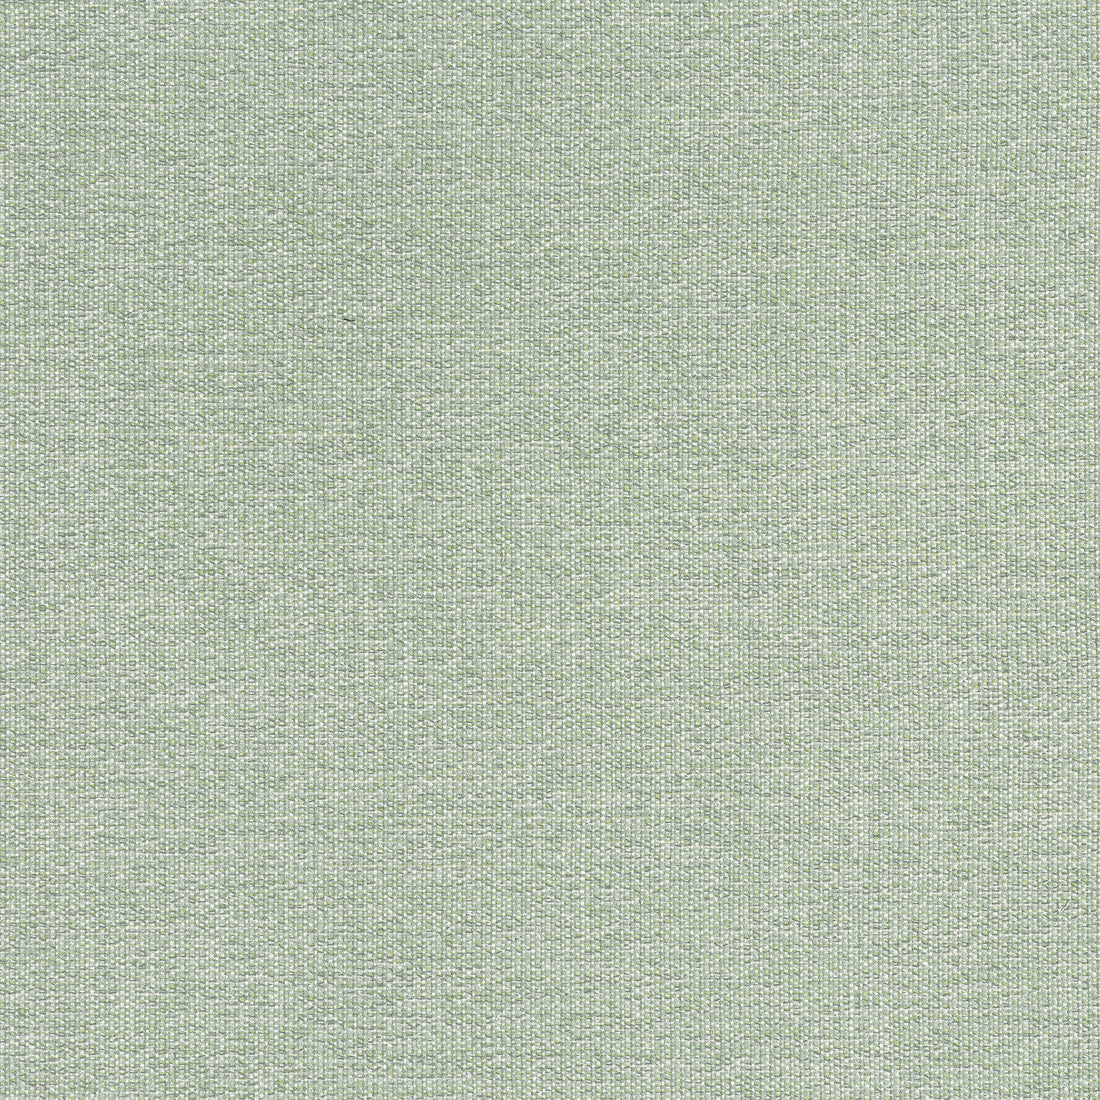 Sacchi fabric in aloe color - pattern number W8759 - by Thibaut in the Haven Textures collection